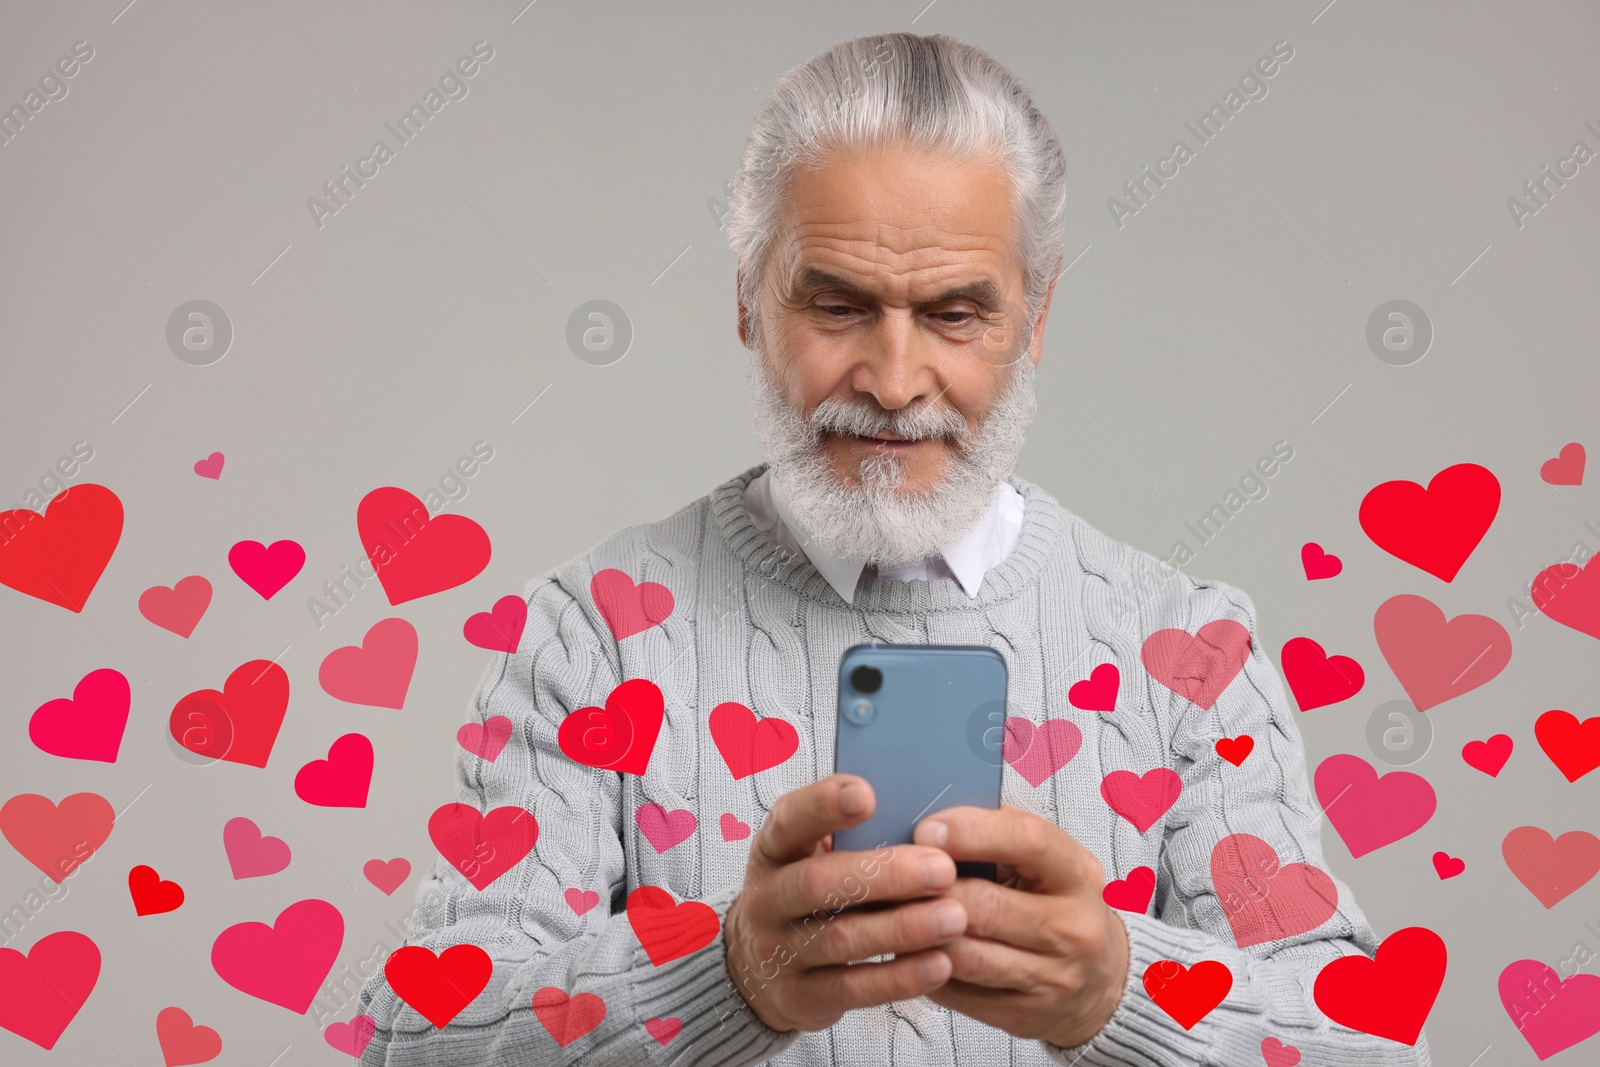 Image of Long distance love. Man chatting with sweetheart via smartphone on grey background. Hearts flying out of device and swirling around him